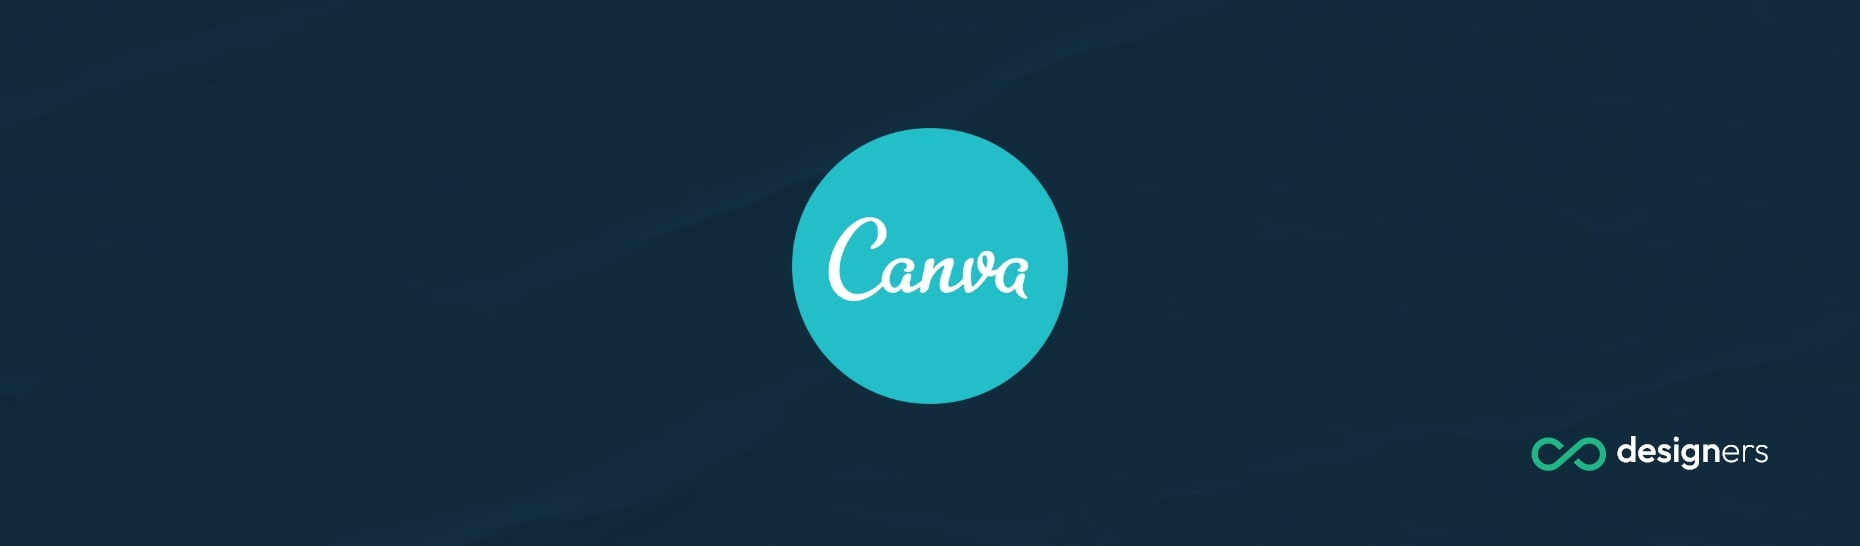 Can I Make YouTube Videos With Canva?